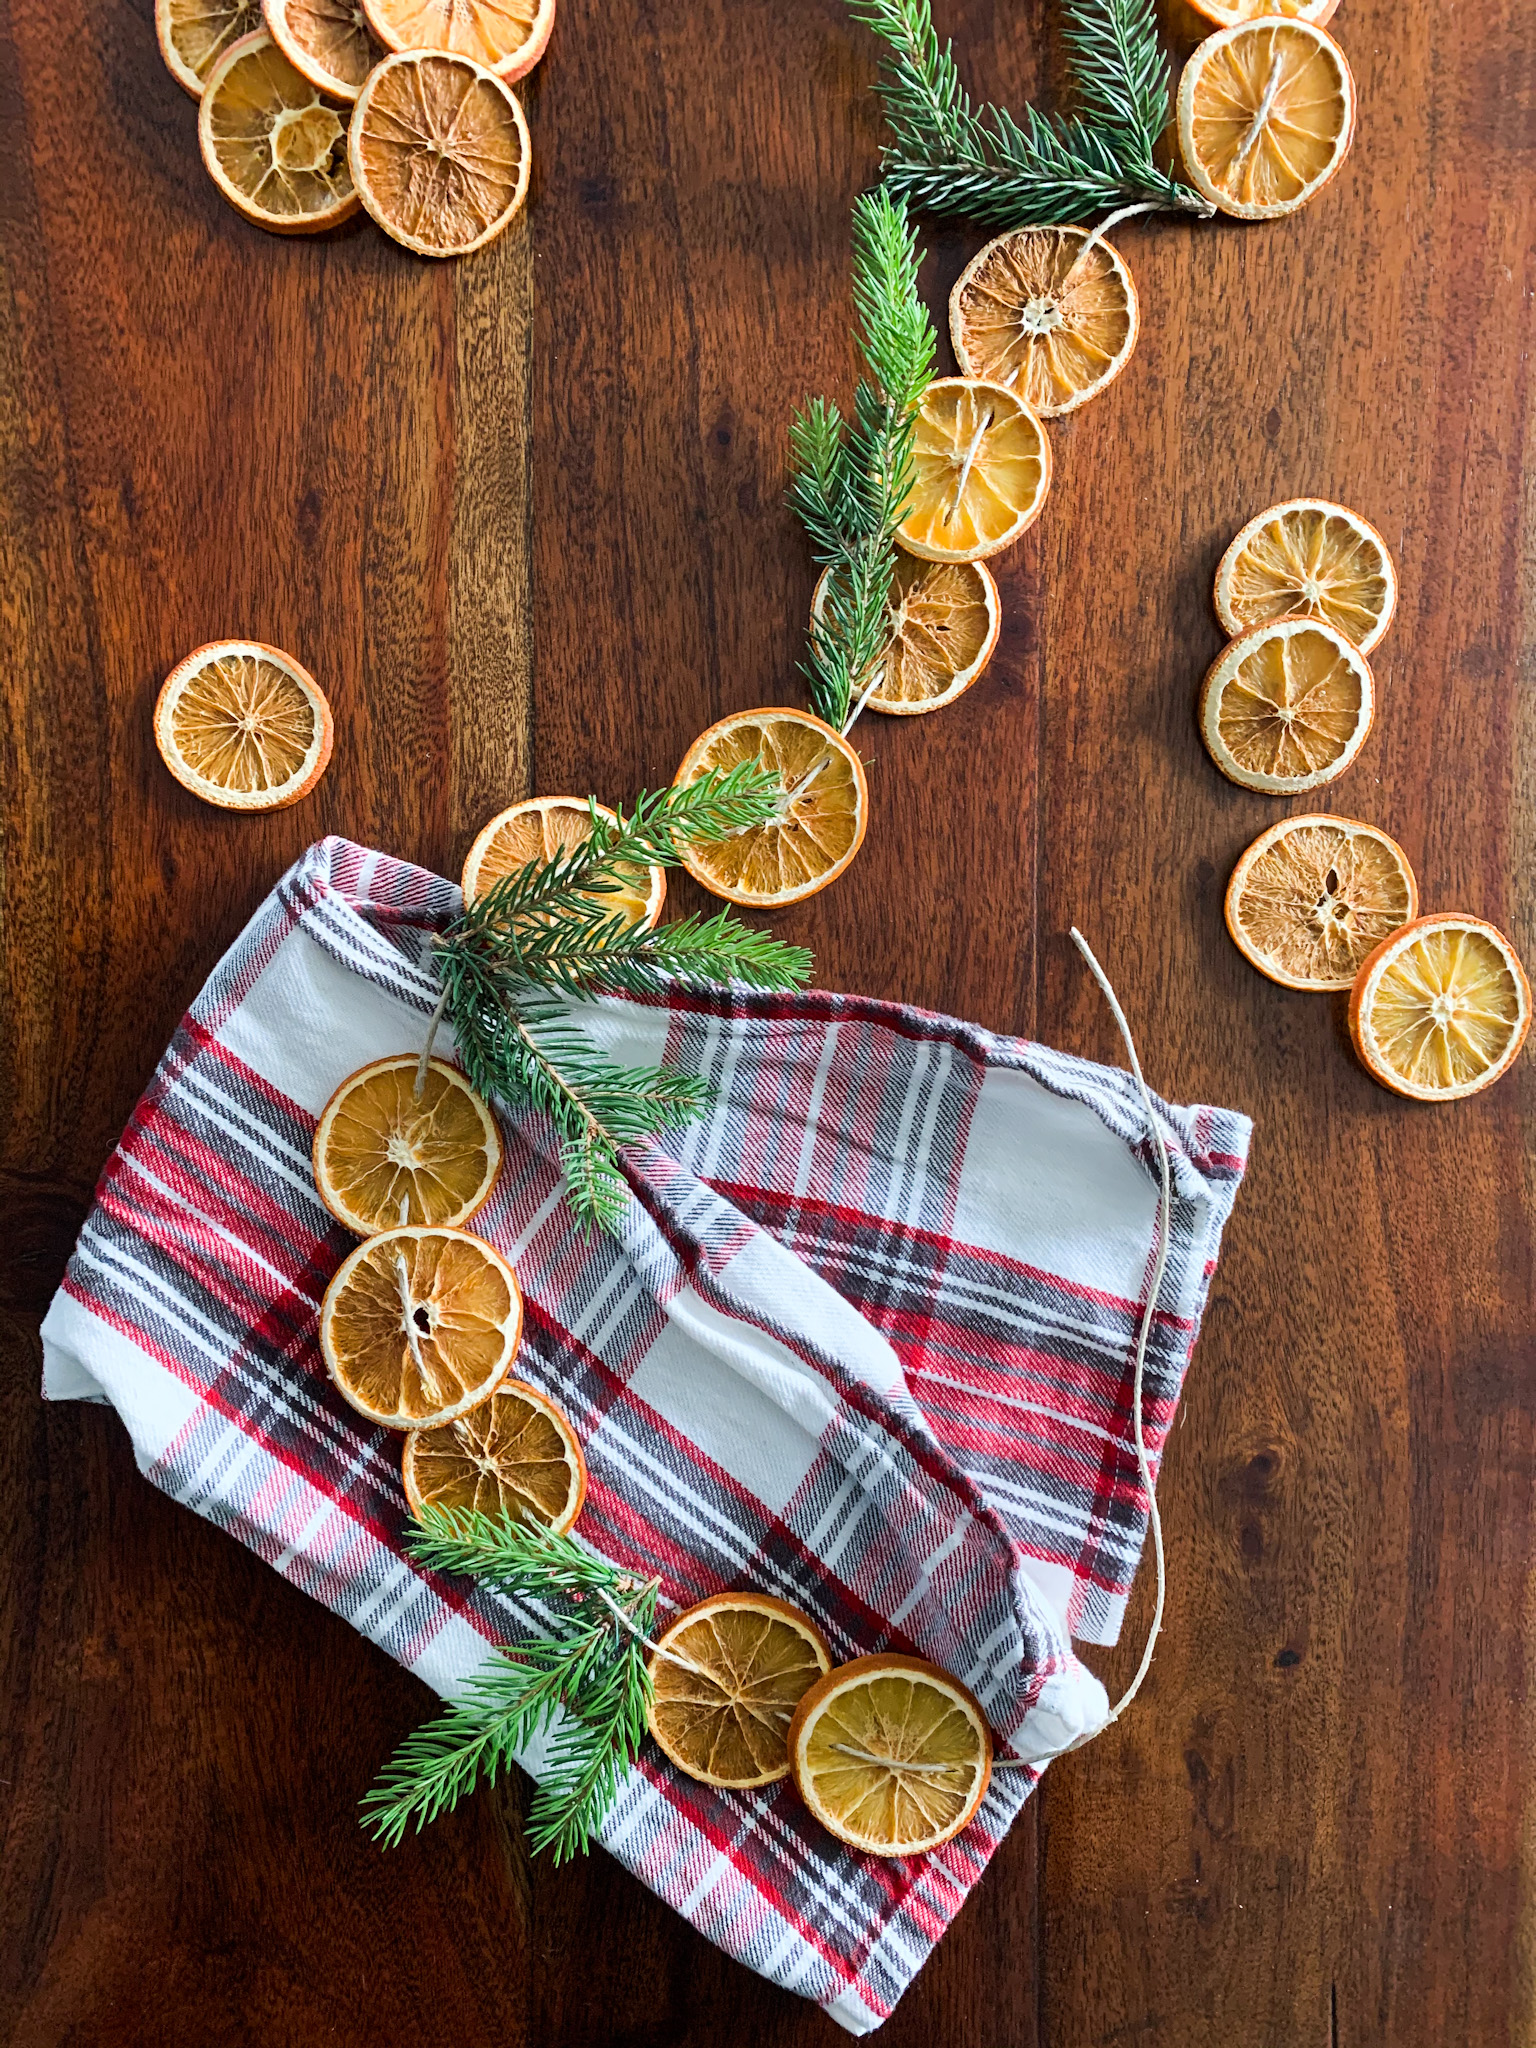 dried orange garland with pine on the table and a plaid towel